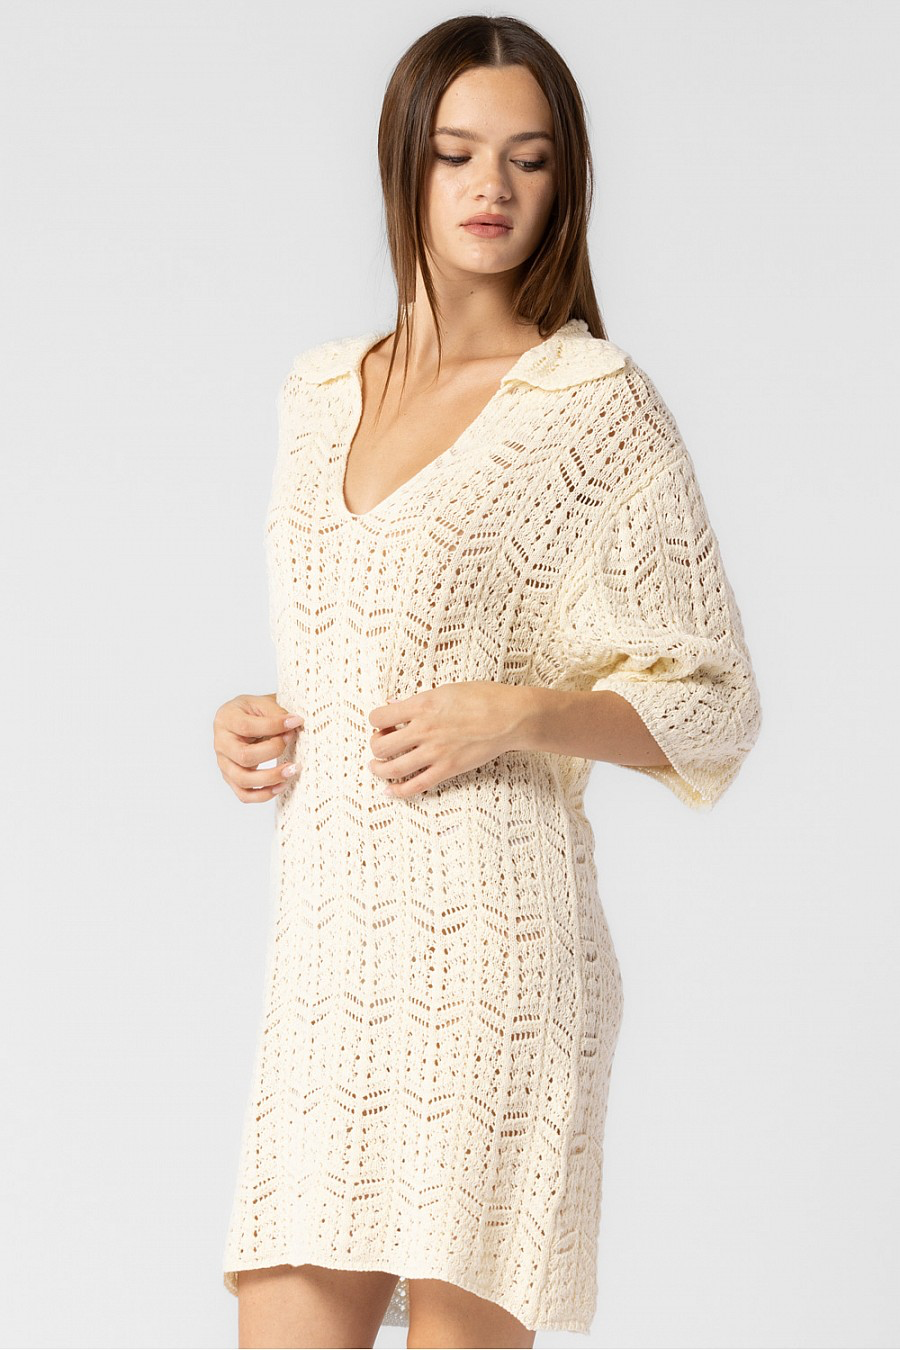 Cream colored crochet cover up dress.